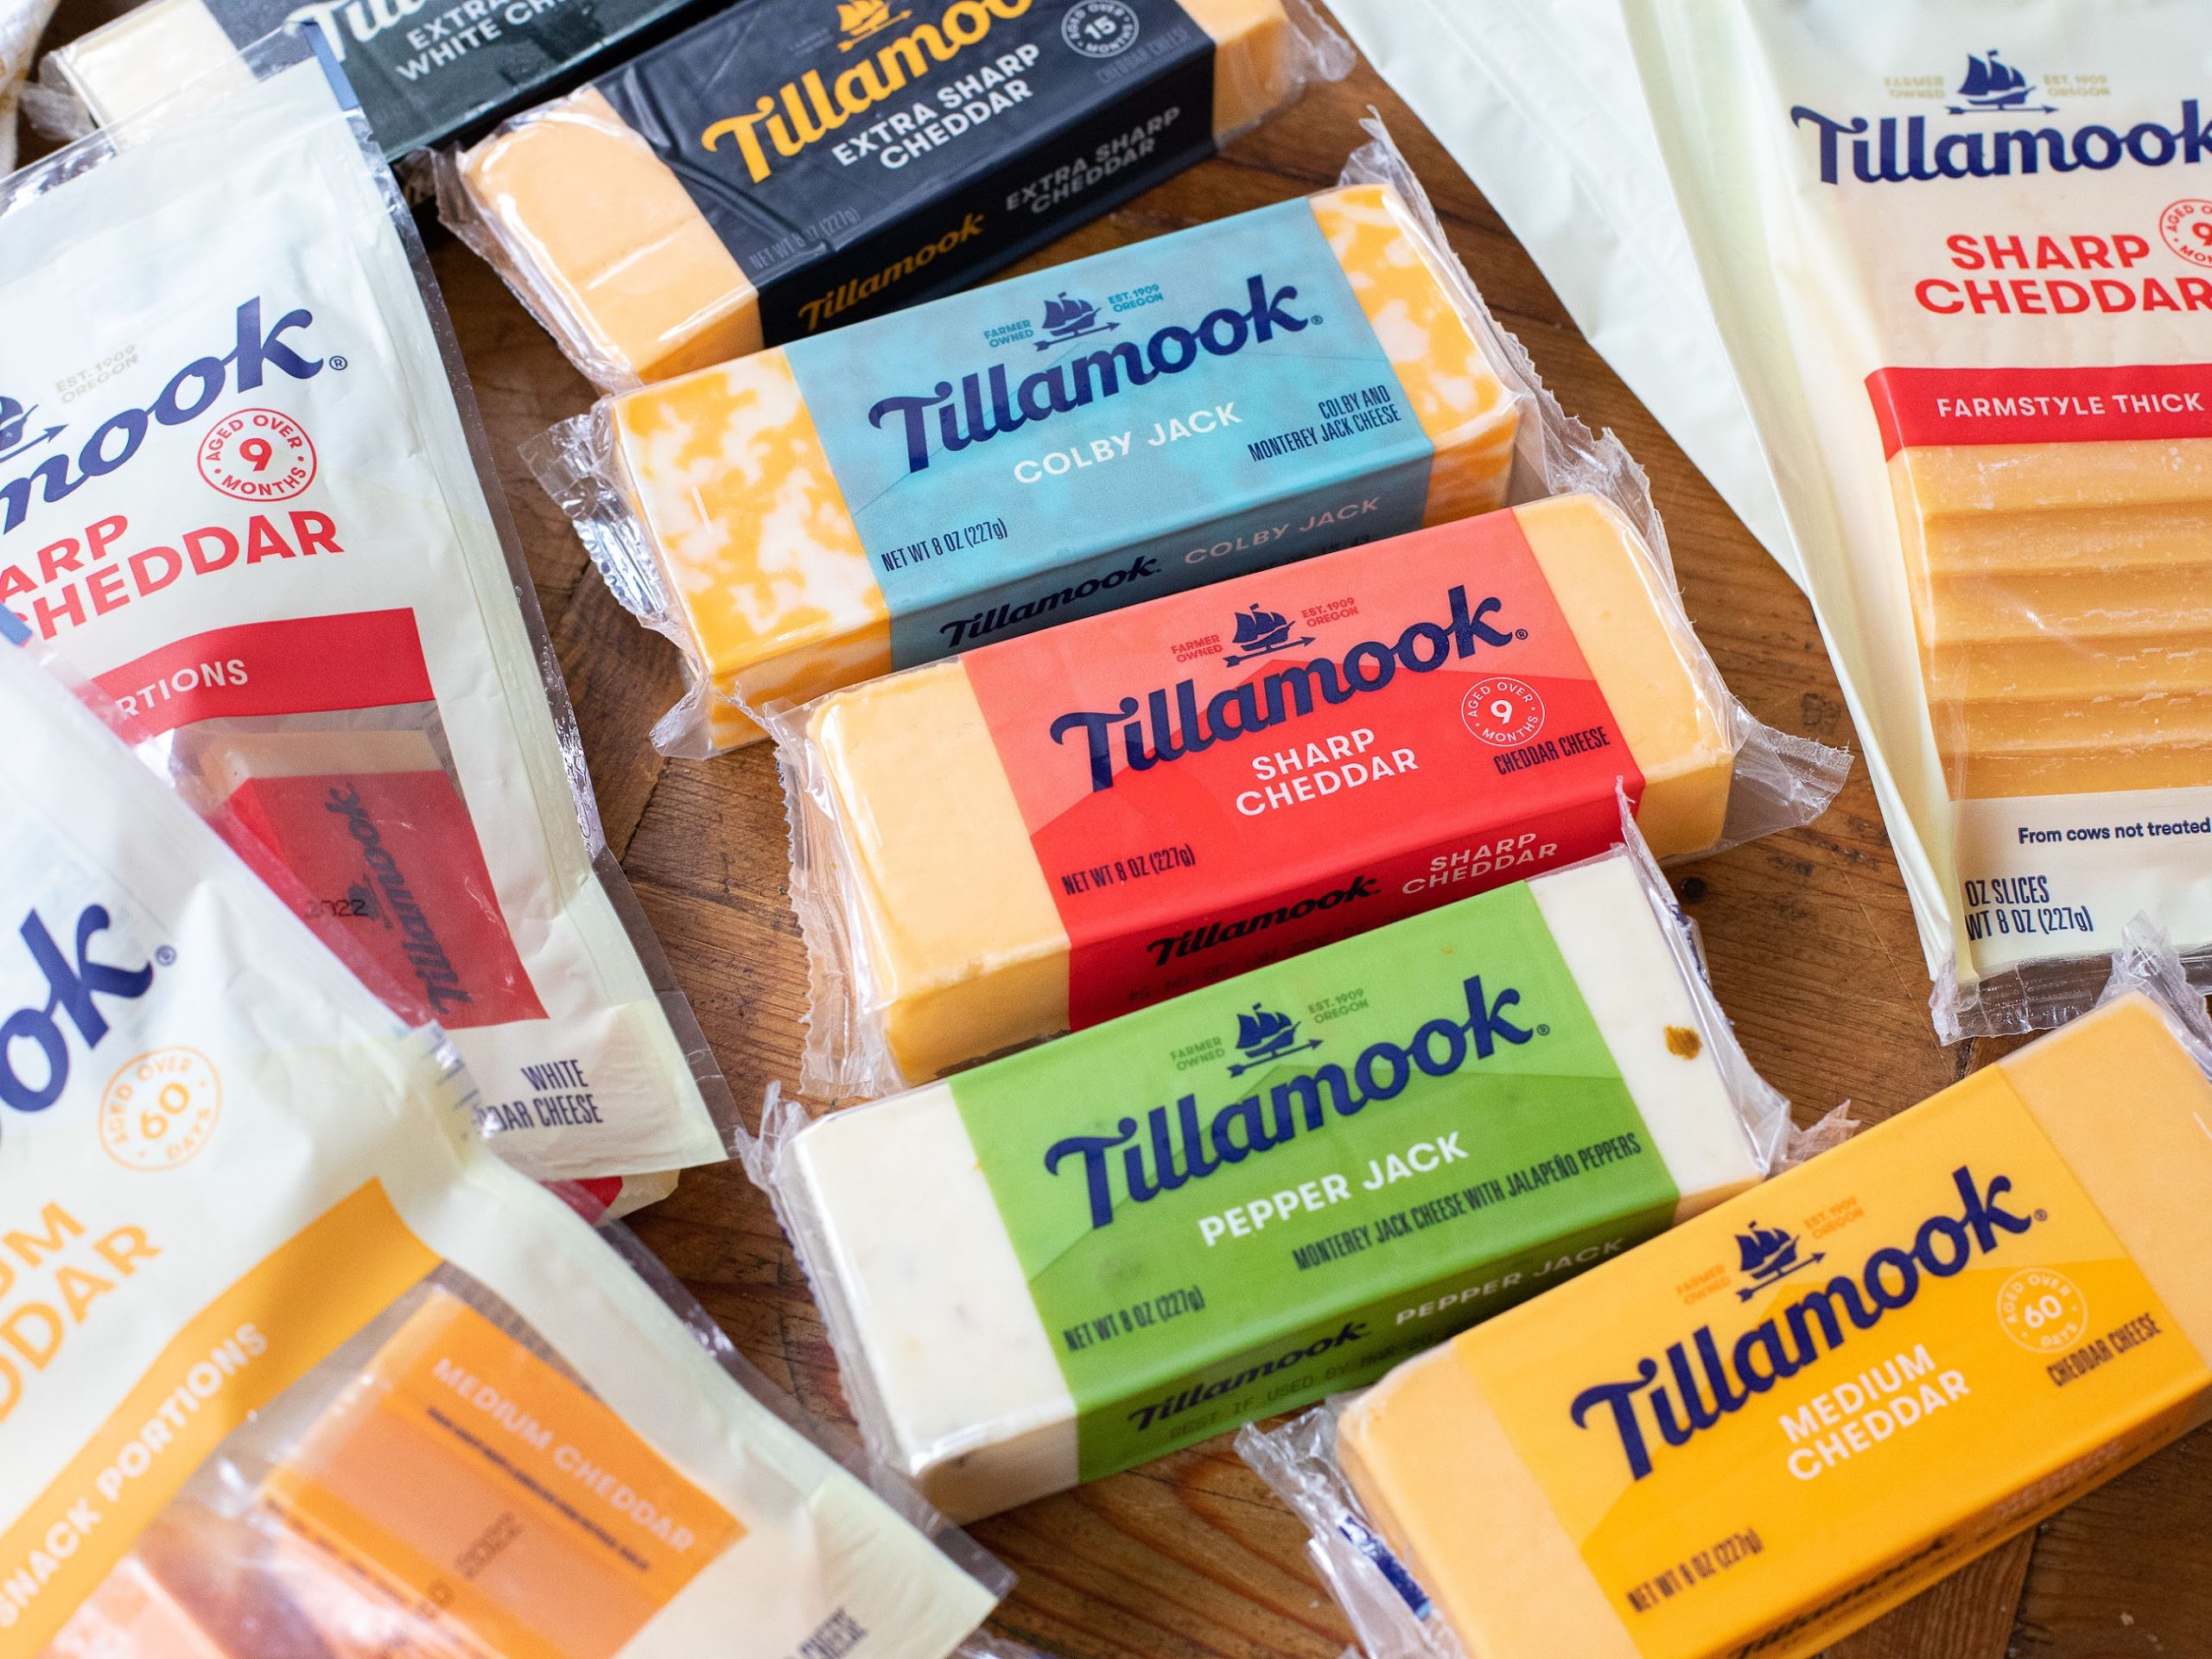 Get A $5 Publix Gift Card When You Bring Home Delicious Tillamook Products! on I Heart Publix 2